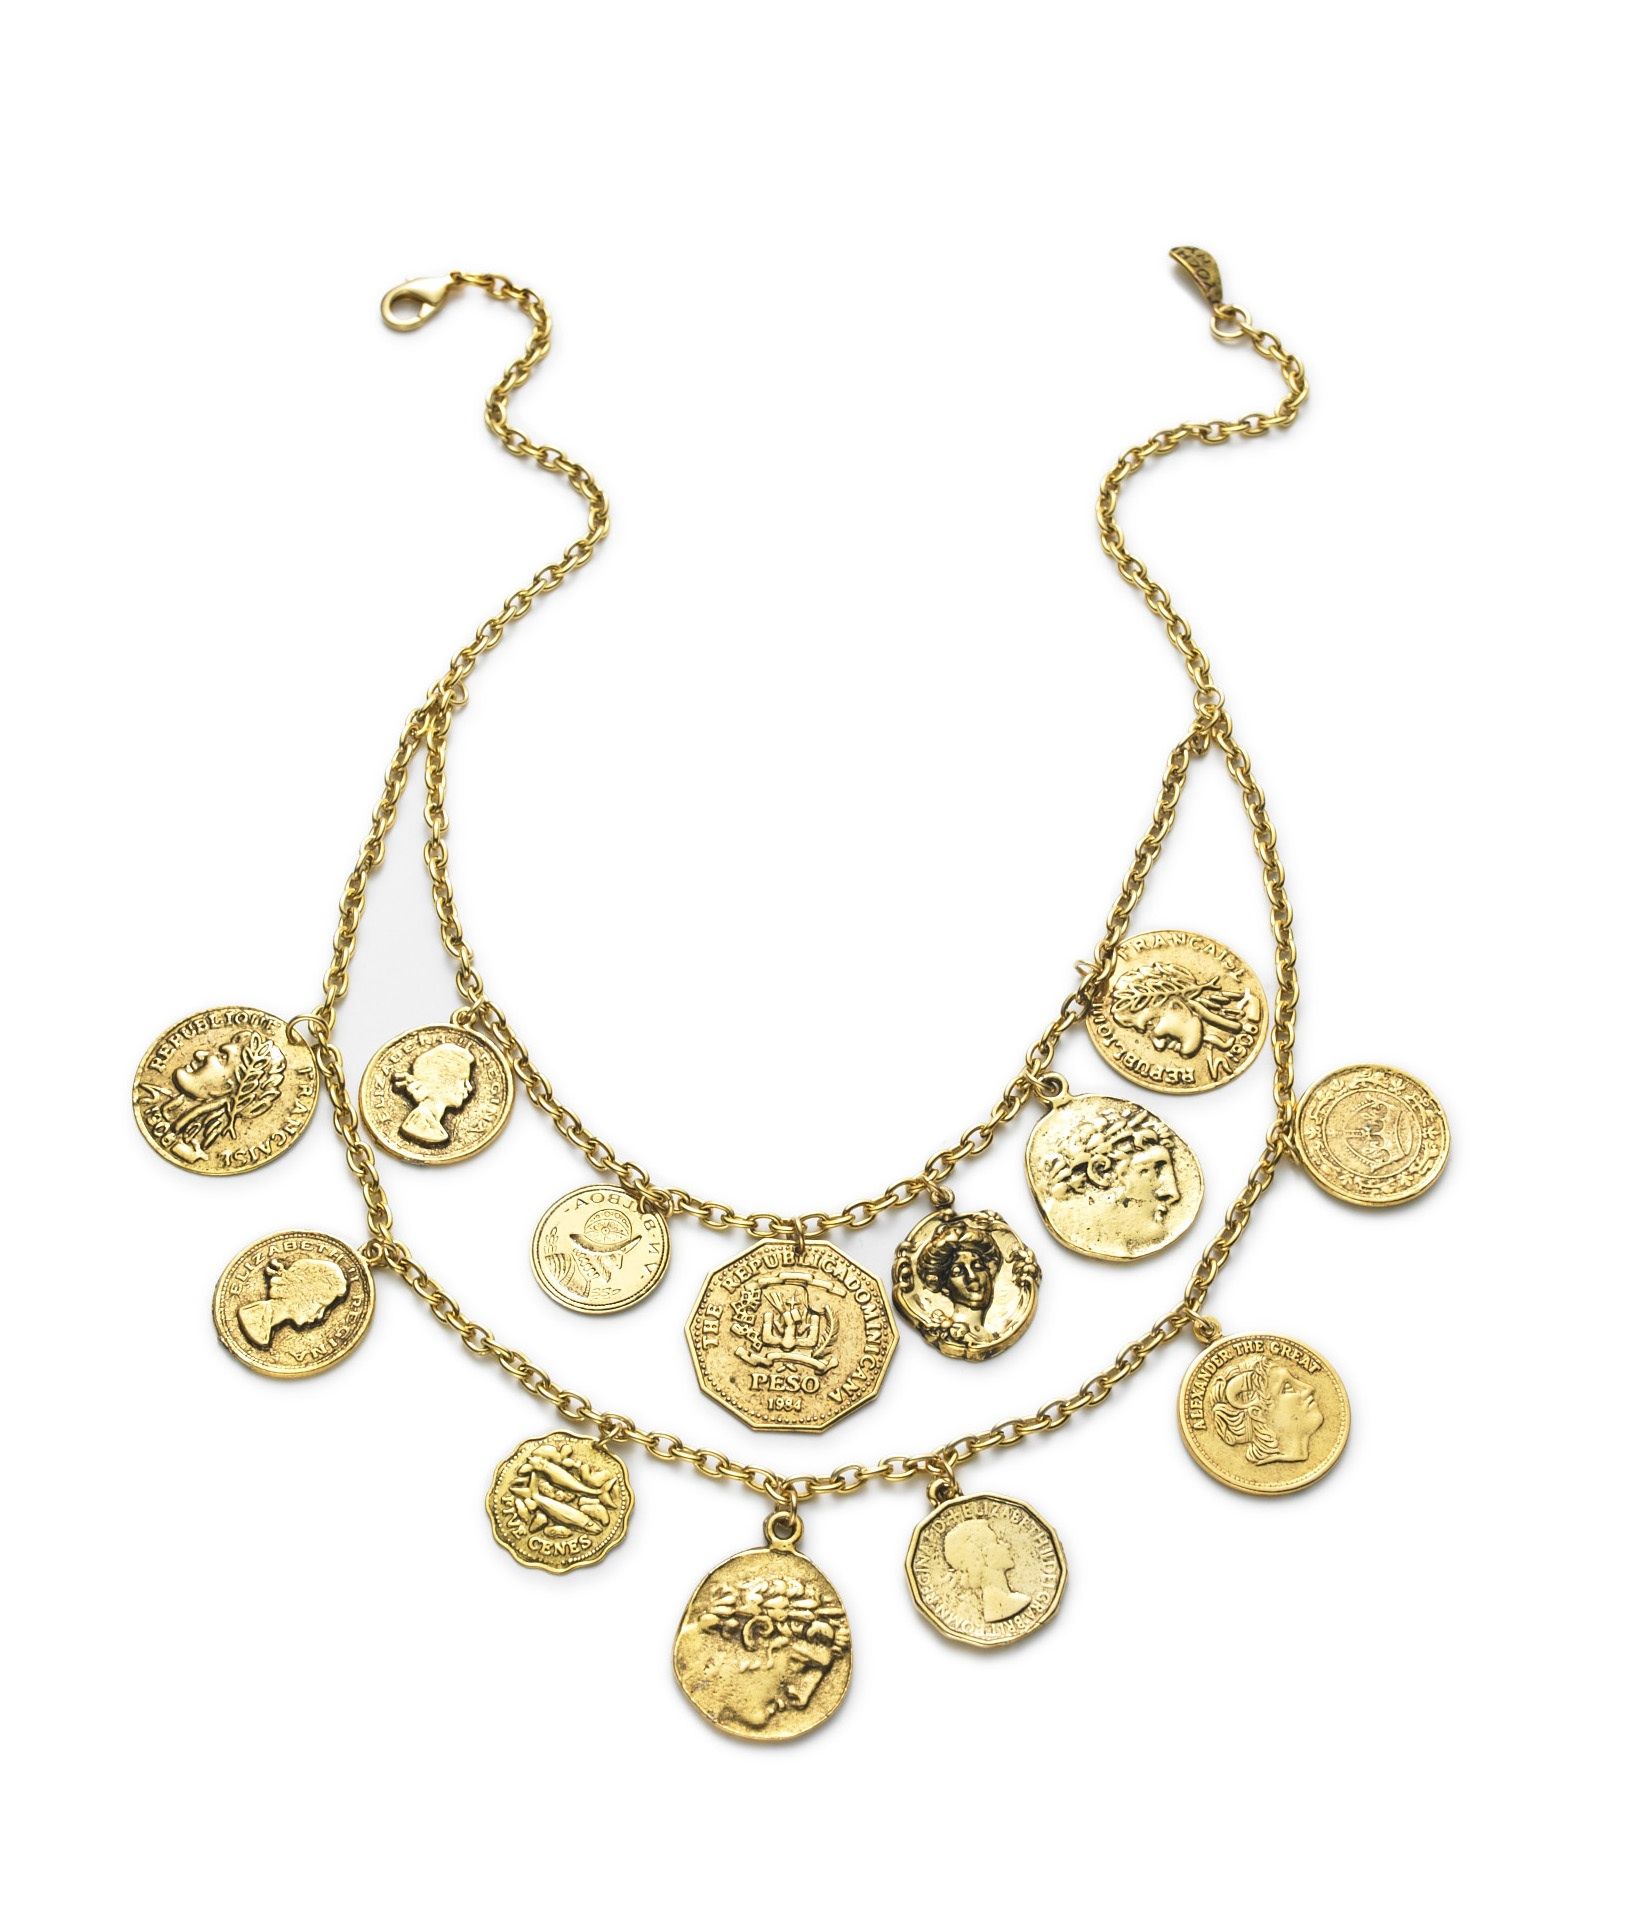 Coin Necklace  $39.99  Compare at $55